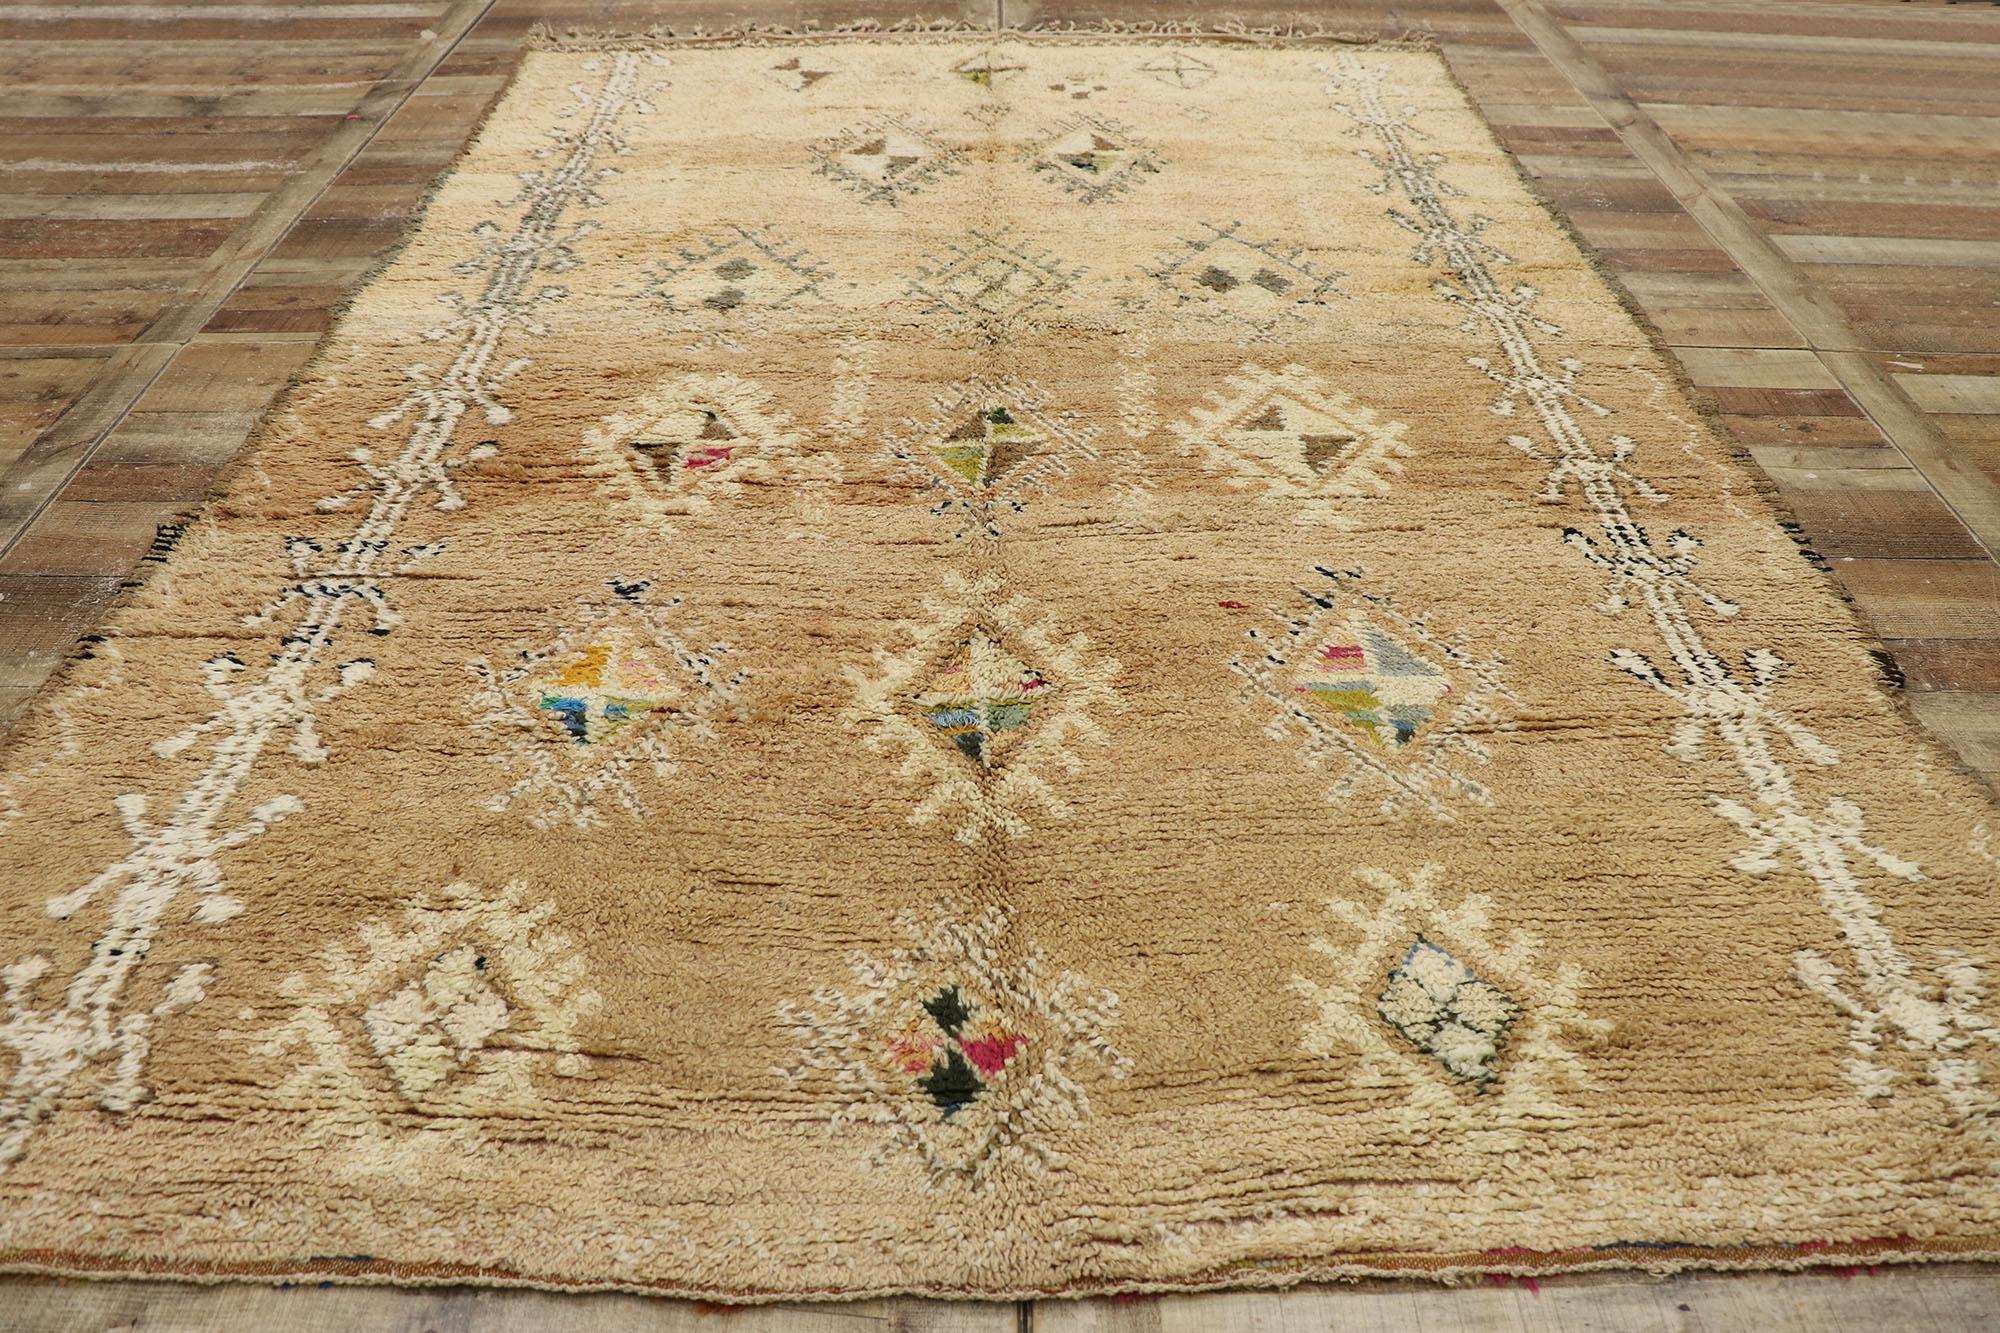 20th Century Vintage Beni MGuild Moroccan Rug by Berber Tribes of Morocco For Sale